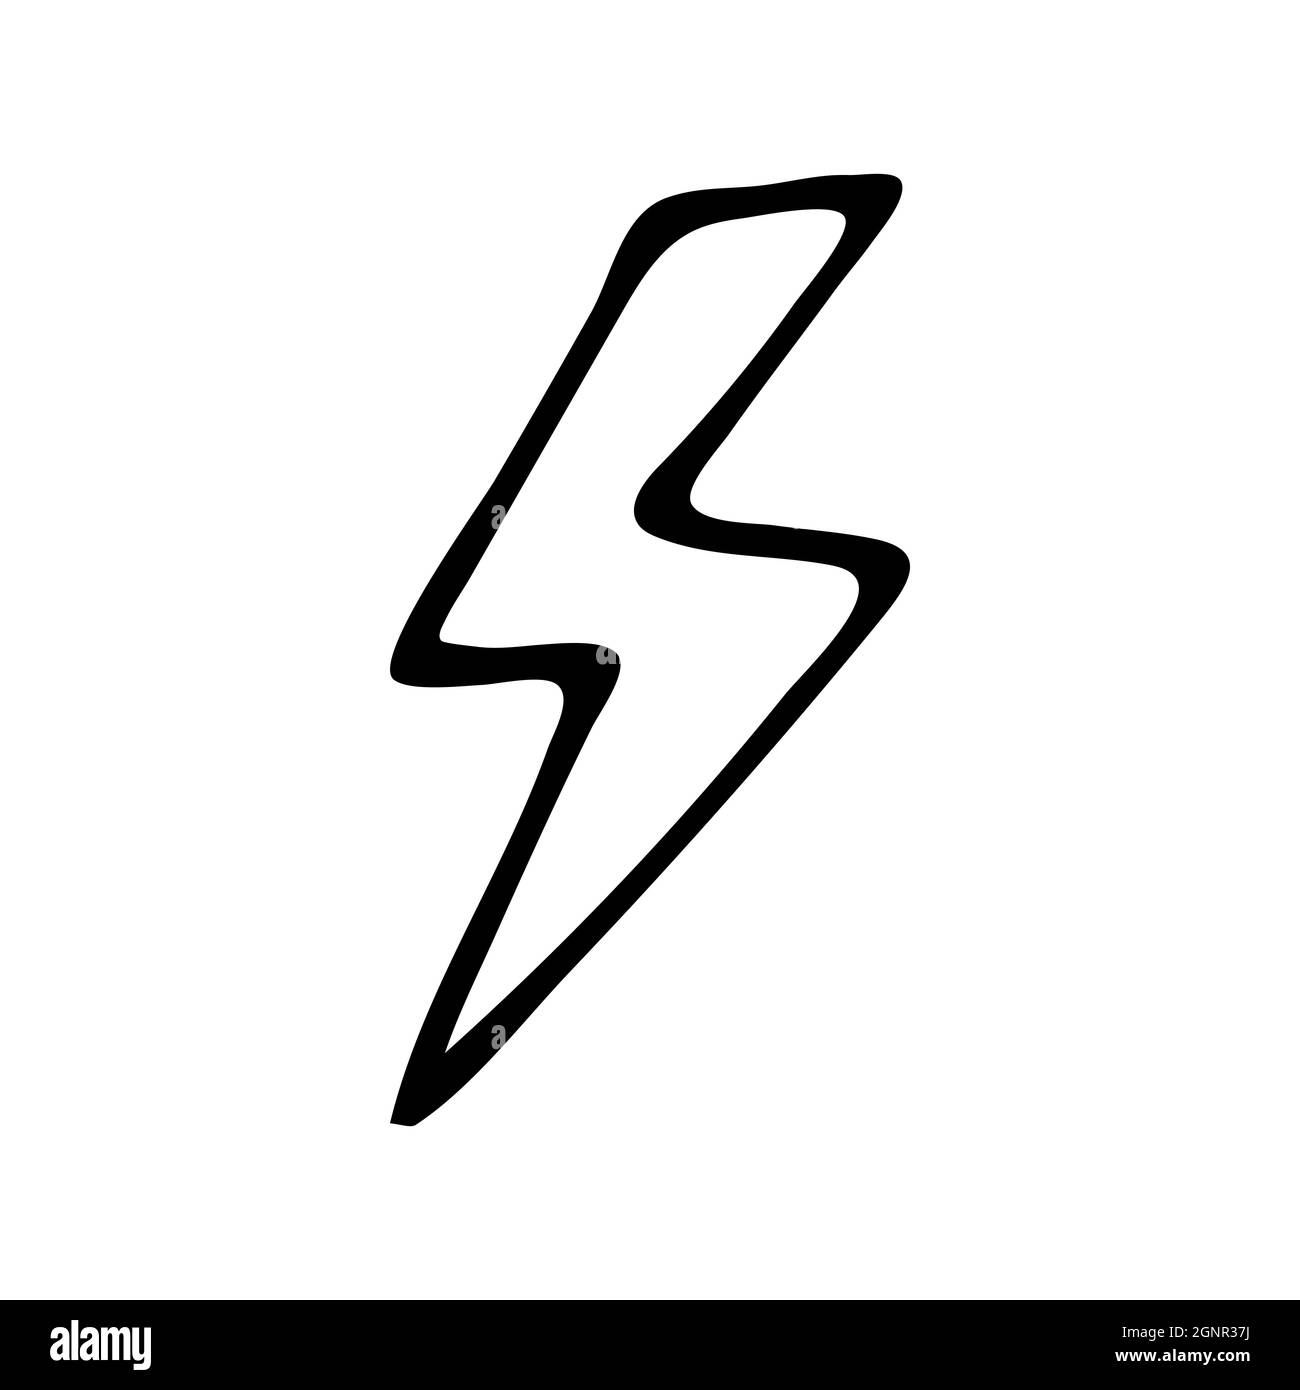 Hand drawn doodle style lightning in vector. Isolated illustration on white background. For interior design, wallpaper, packaging, poster Stock Vector